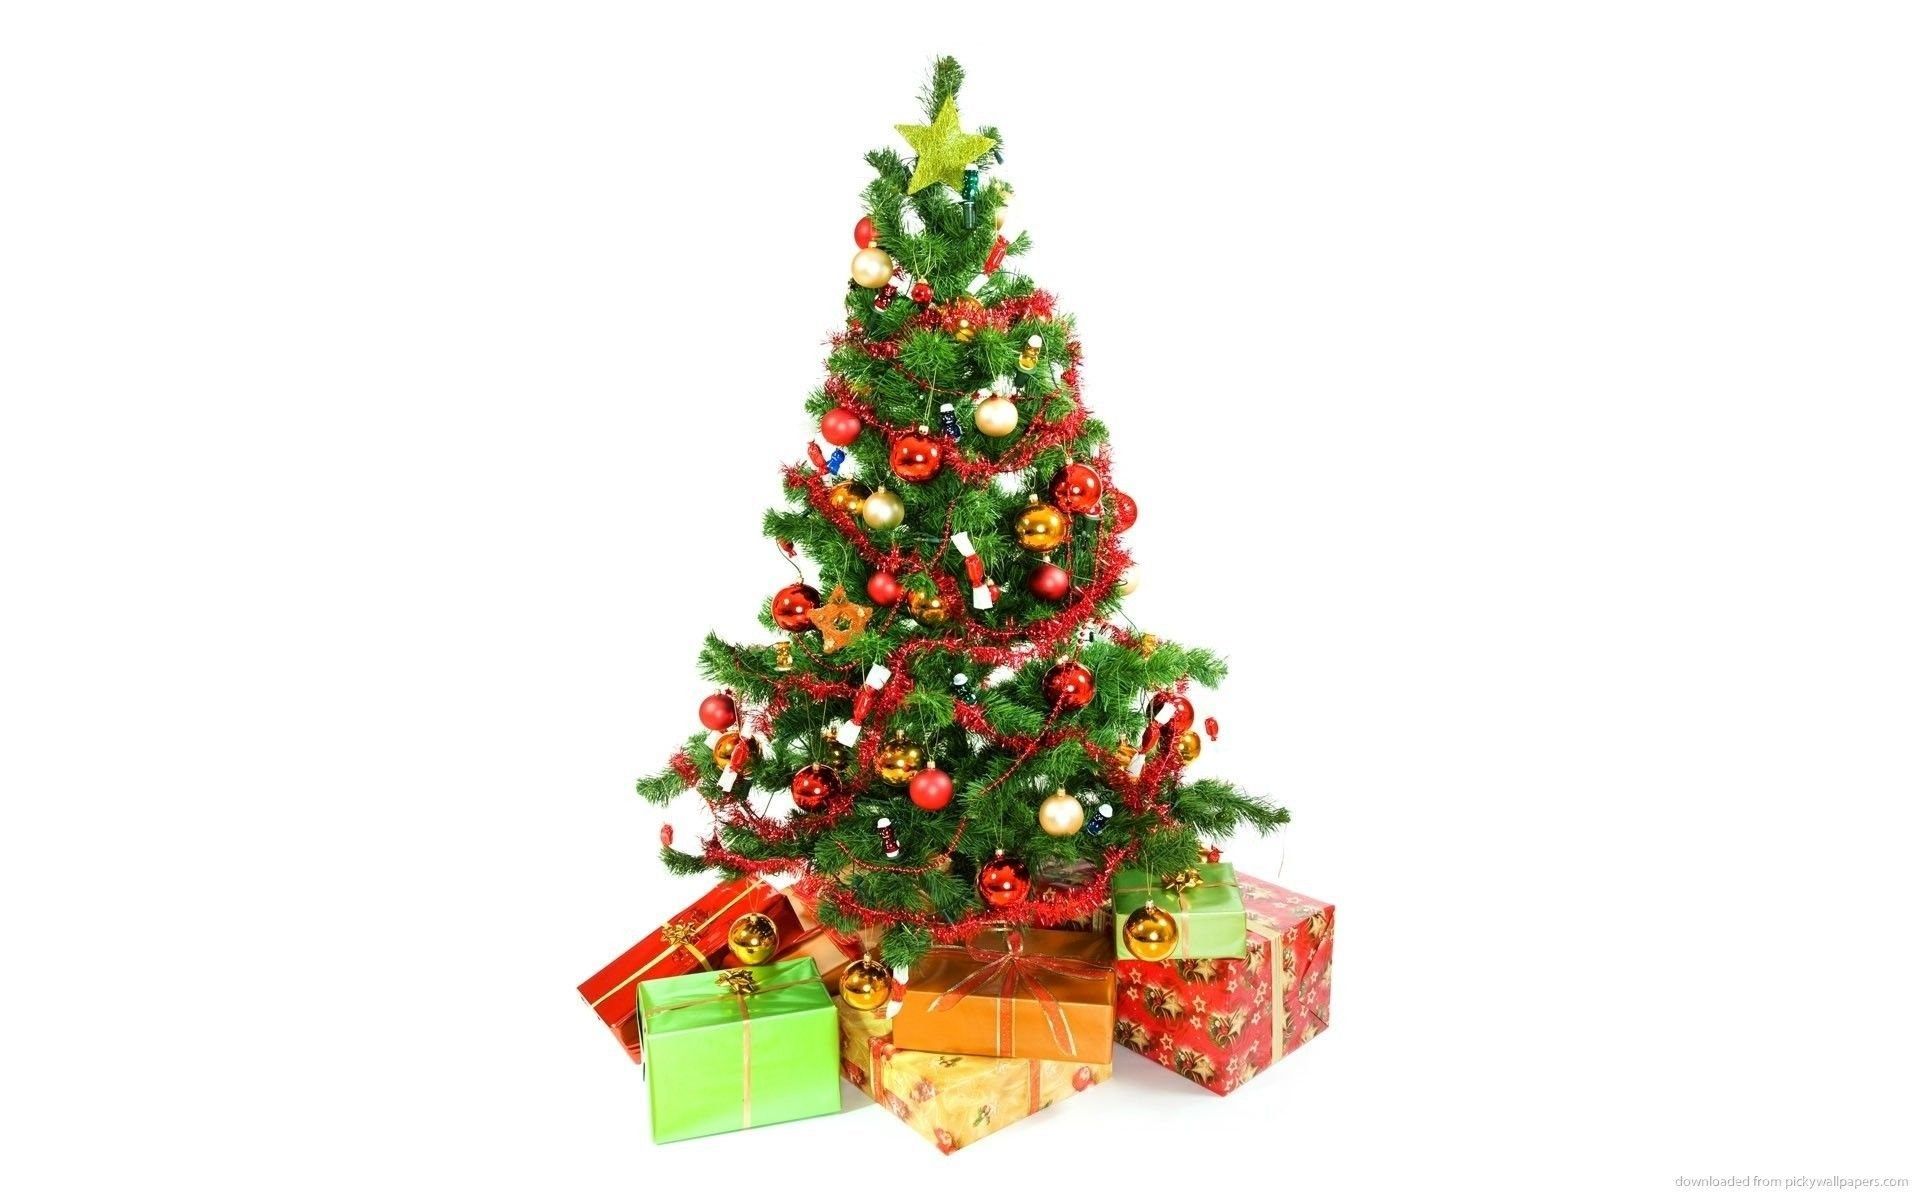 Download 1920x1200 Christmas Tree With Presents Underneath On A. Desktop Background